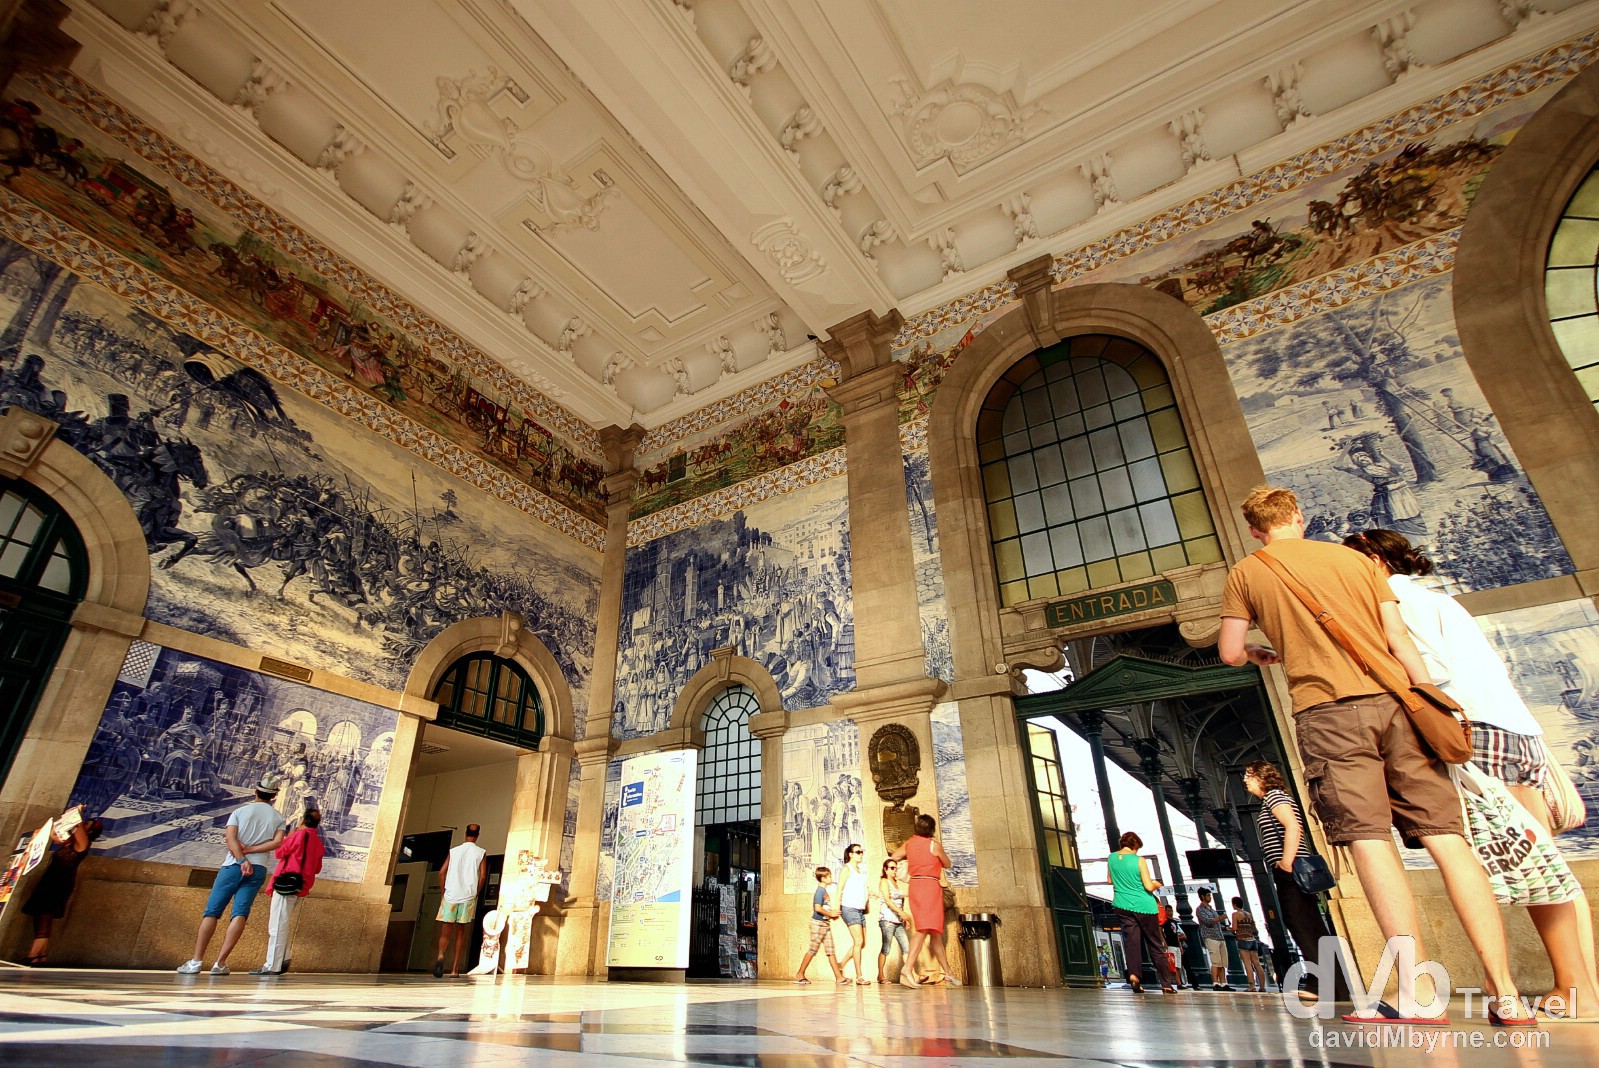 Azulejo in Sao Bento Station. Azulejo is a form of Portuguese painted ceramic tile work that has been produced without interruption for five centuries & has become a typical aspect of Portuguese culture & a major aspect of Portuguese architecture - the tiles are applied on walls, floors, ceilings & even on the streets. Ten years of work went into finishing the 20,000 tiles found here, in the vestibule of the 1916 Sao Bento train station, a tourist favourite in the city. The azulejo panels here were painted between 1905-1916 by Jorge Colaco, the most important azulejo painter of the time, & depict landscapes & important historical scenes in Portuguese history. I visited this station numerous times while in the city (it's somewhere you always seem to pass by) but, and while nurturing a fast depleting camera battery, waited until the nice light of sunset cast a warm glow in the vestibule before photographing it. Porto, Portugal. August 28th 2013.